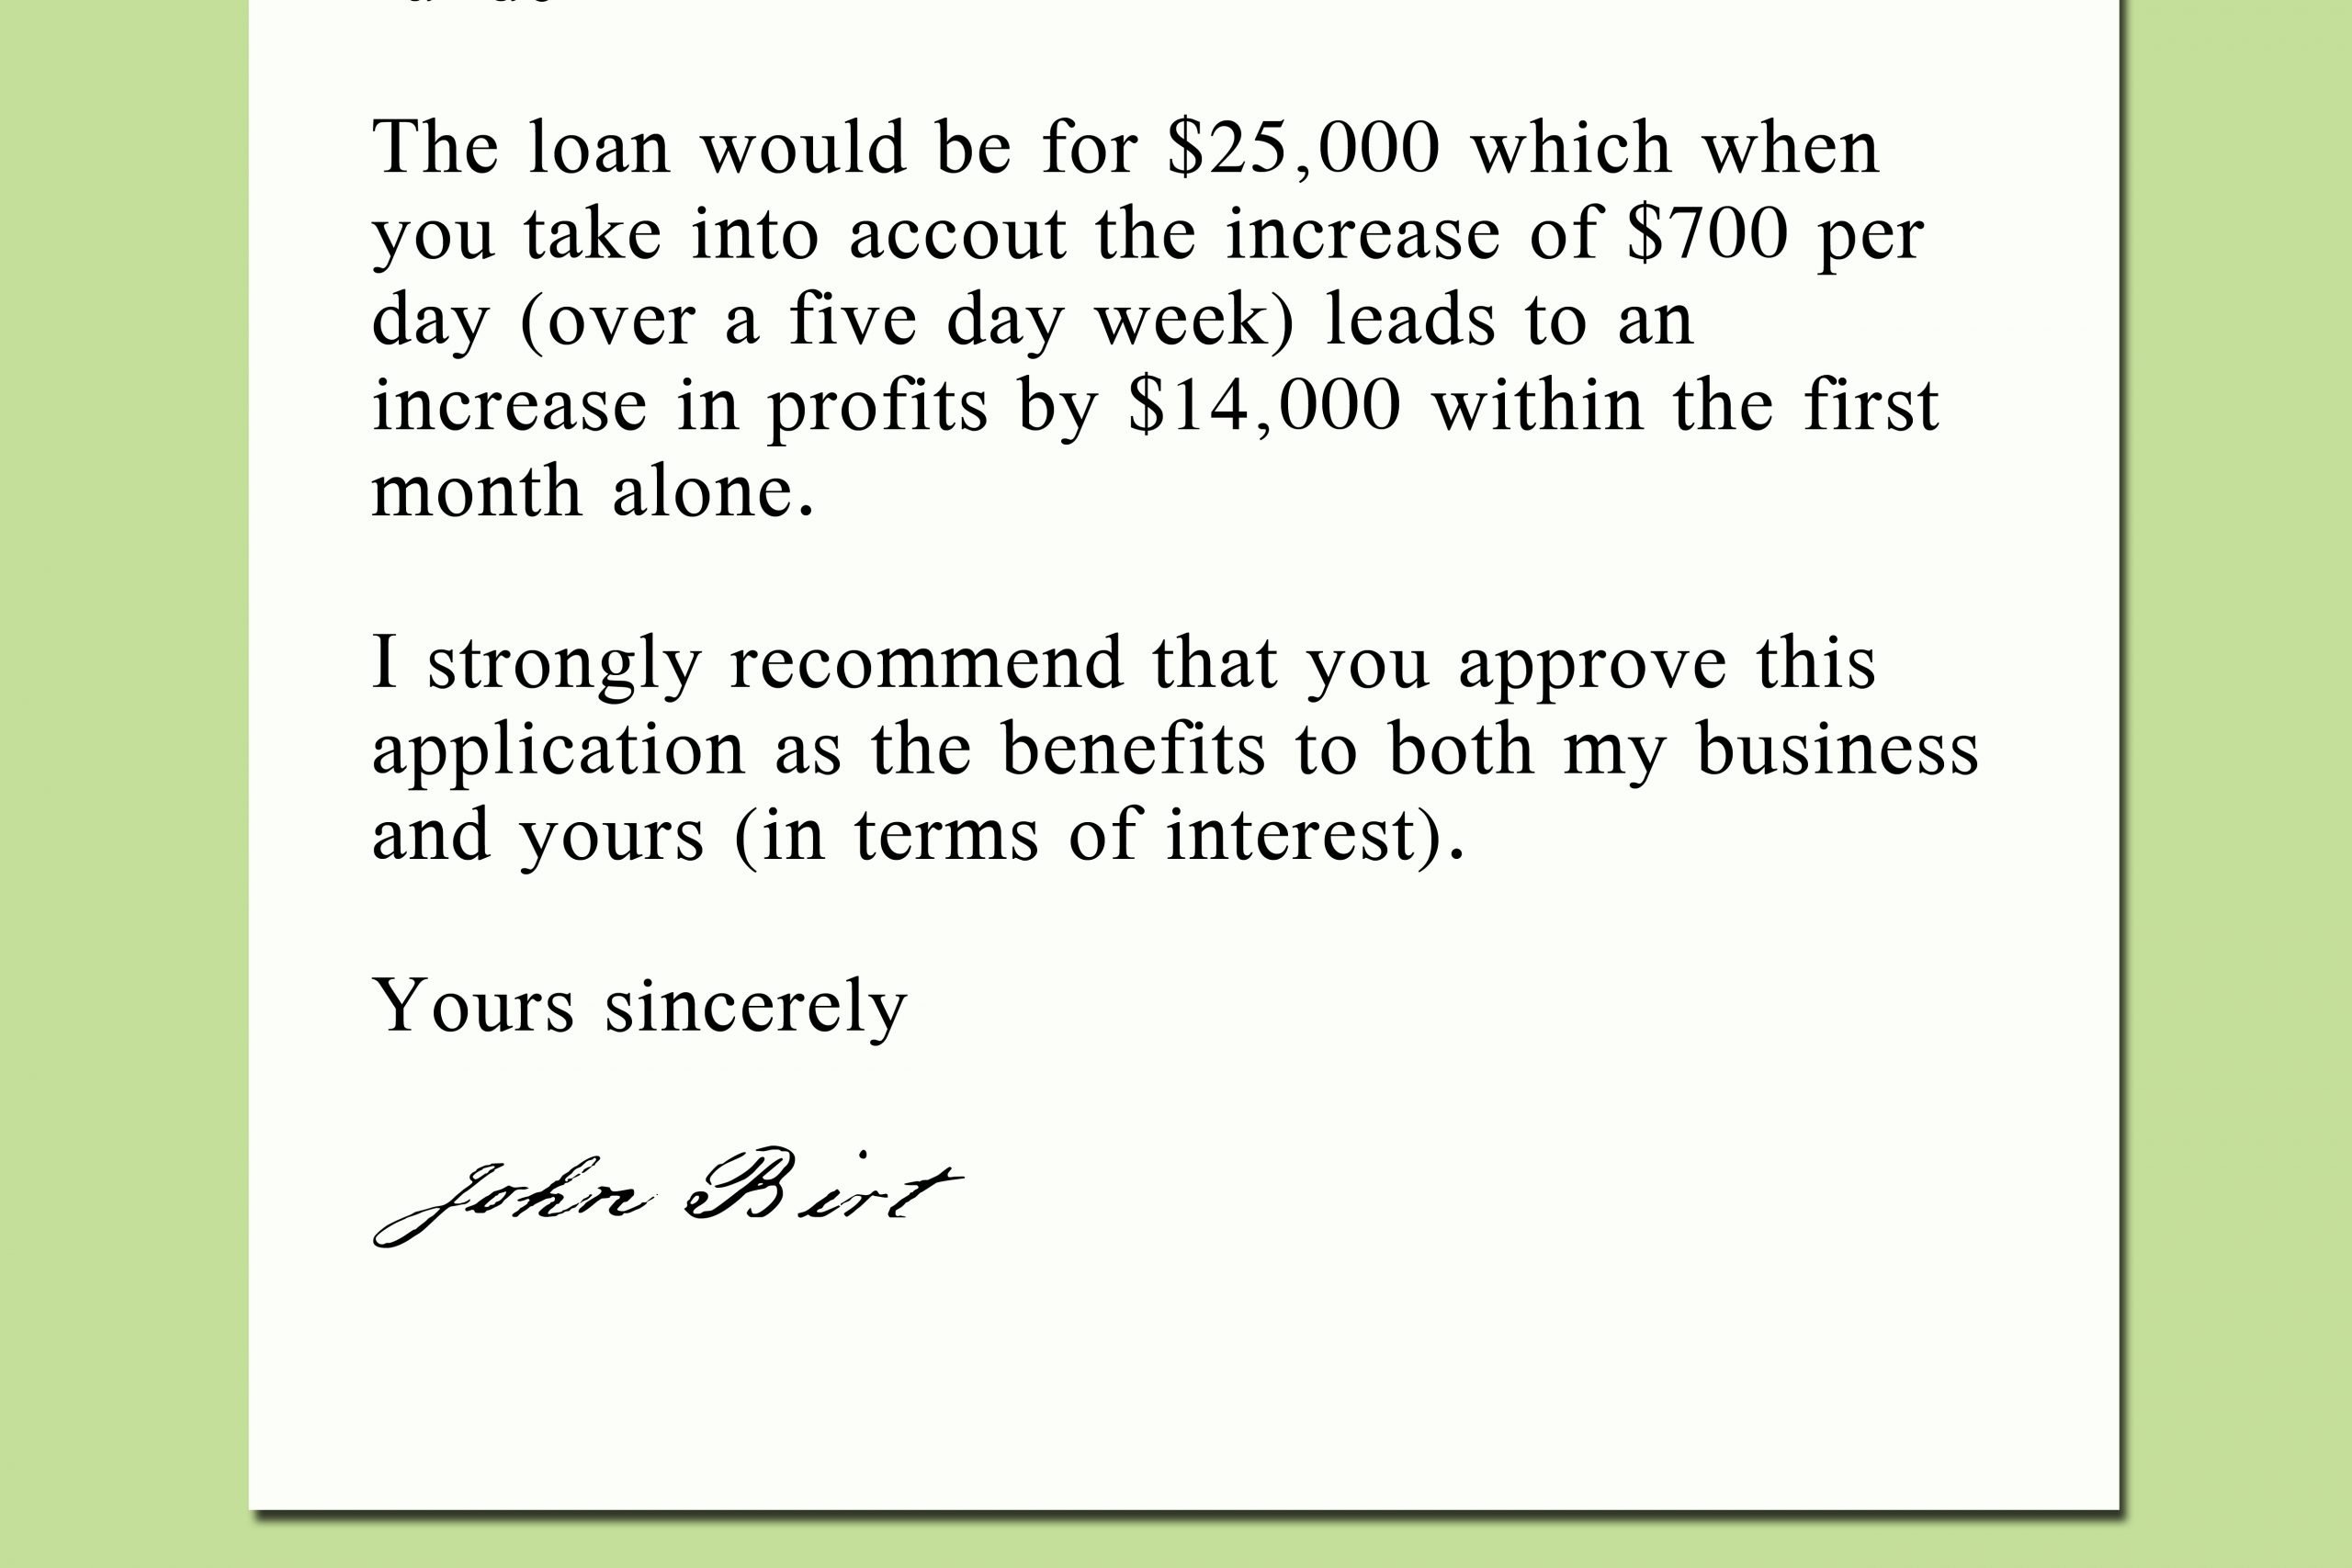 How to Write a Letter to a Bank Asking for a Loan: 9 Steps